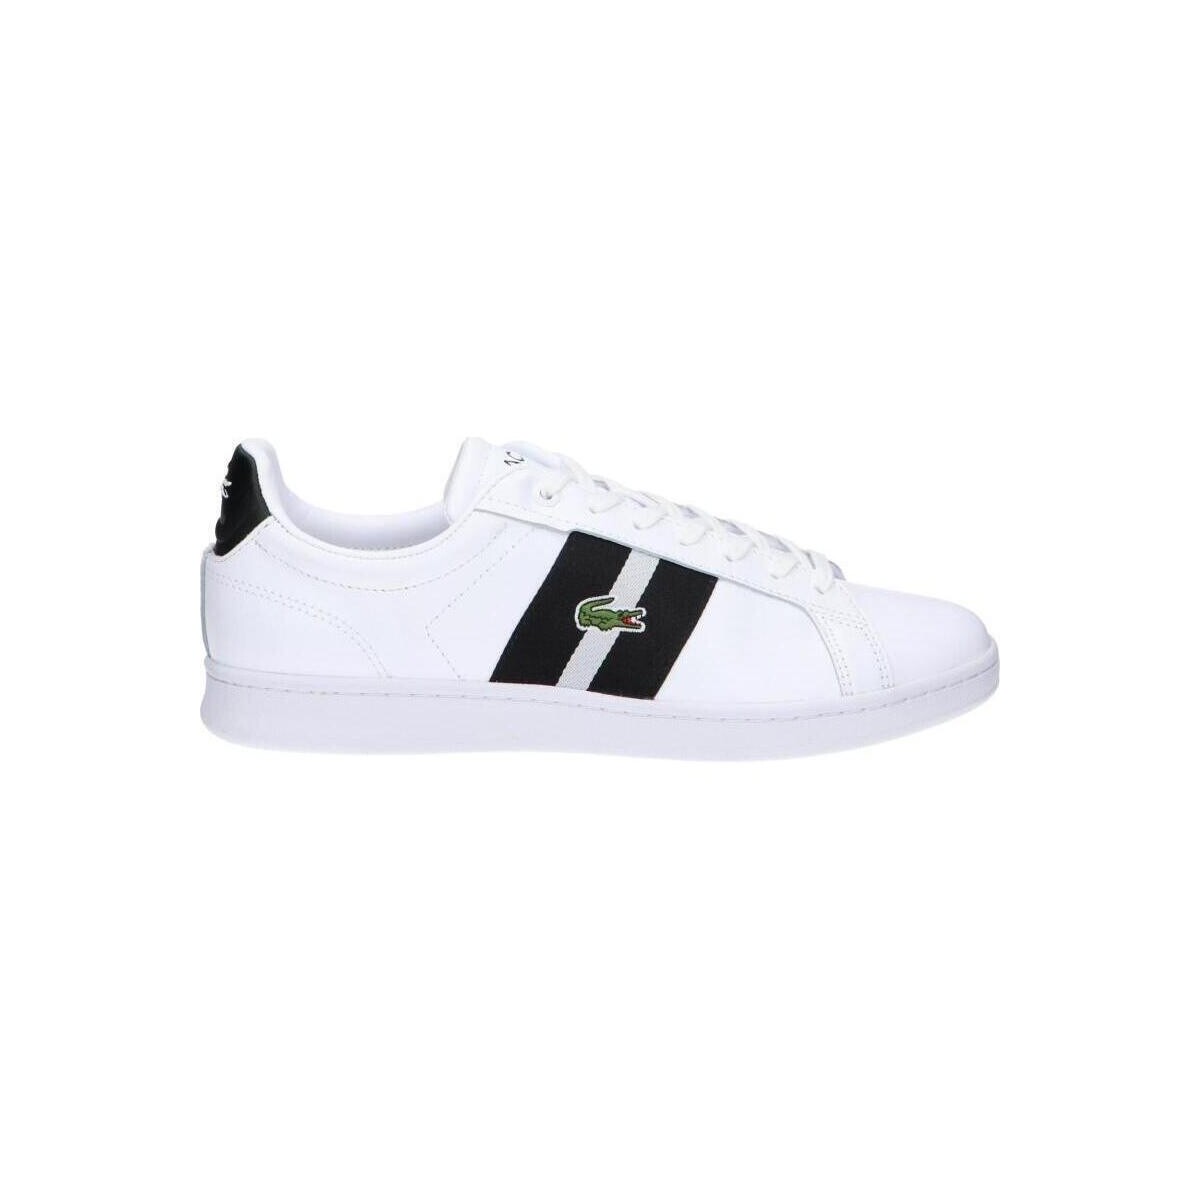 Chaussures Homme Multisport Lacoste 47SMA0047 CARNABY PRO CGR 47SMA0047 CARNABY PRO CGR 